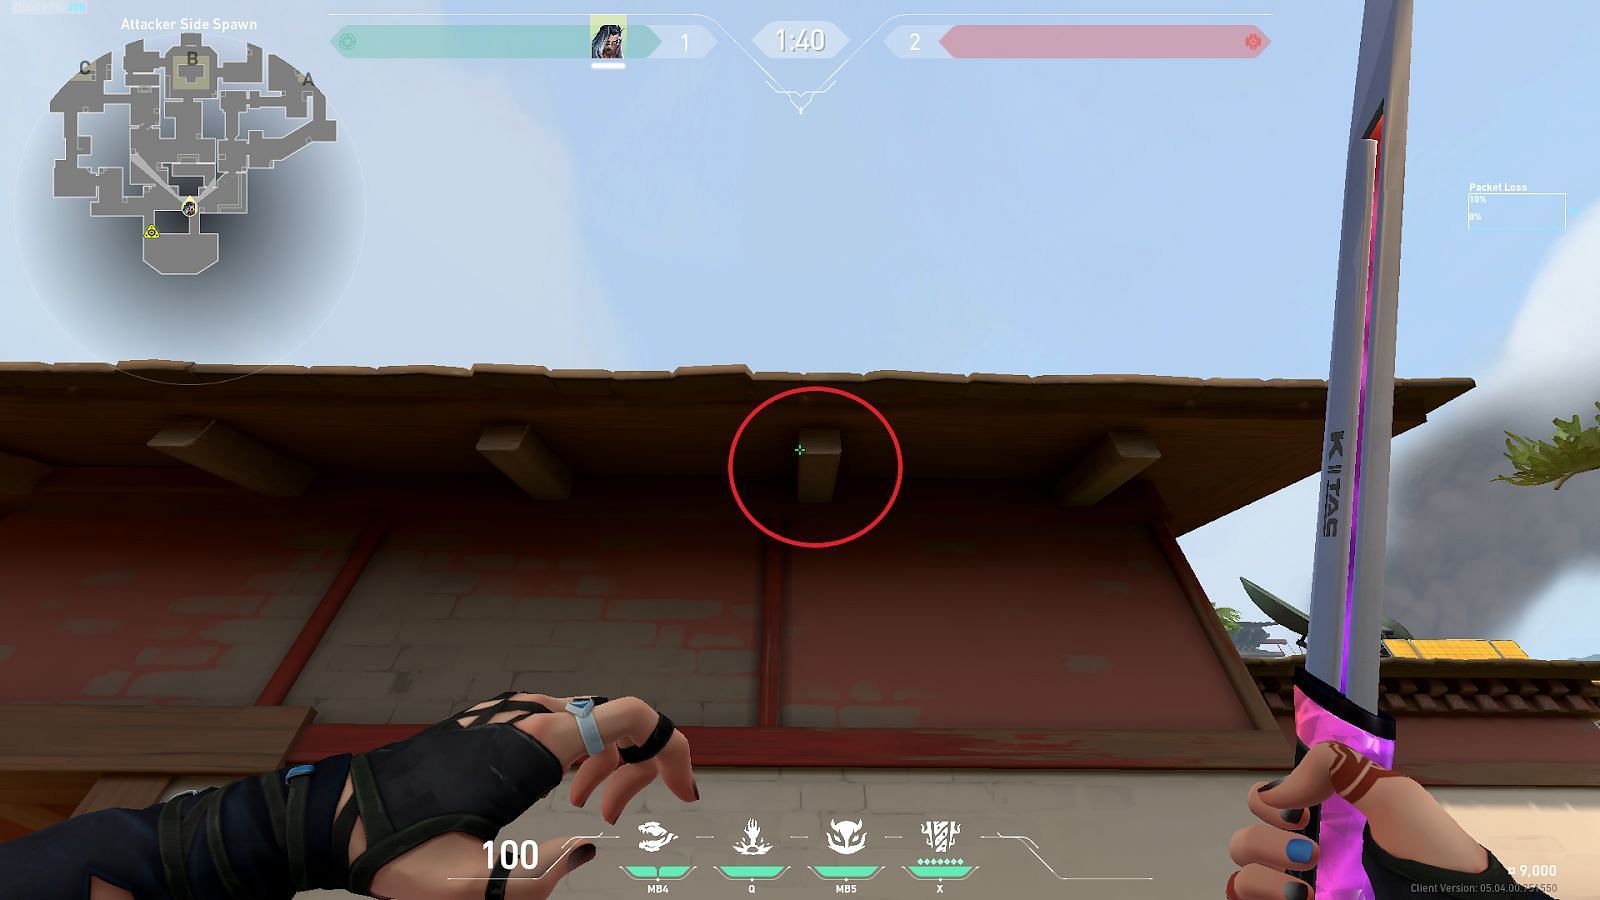 Outside Attacker spawn near Mid Window (Image via Riot Games)